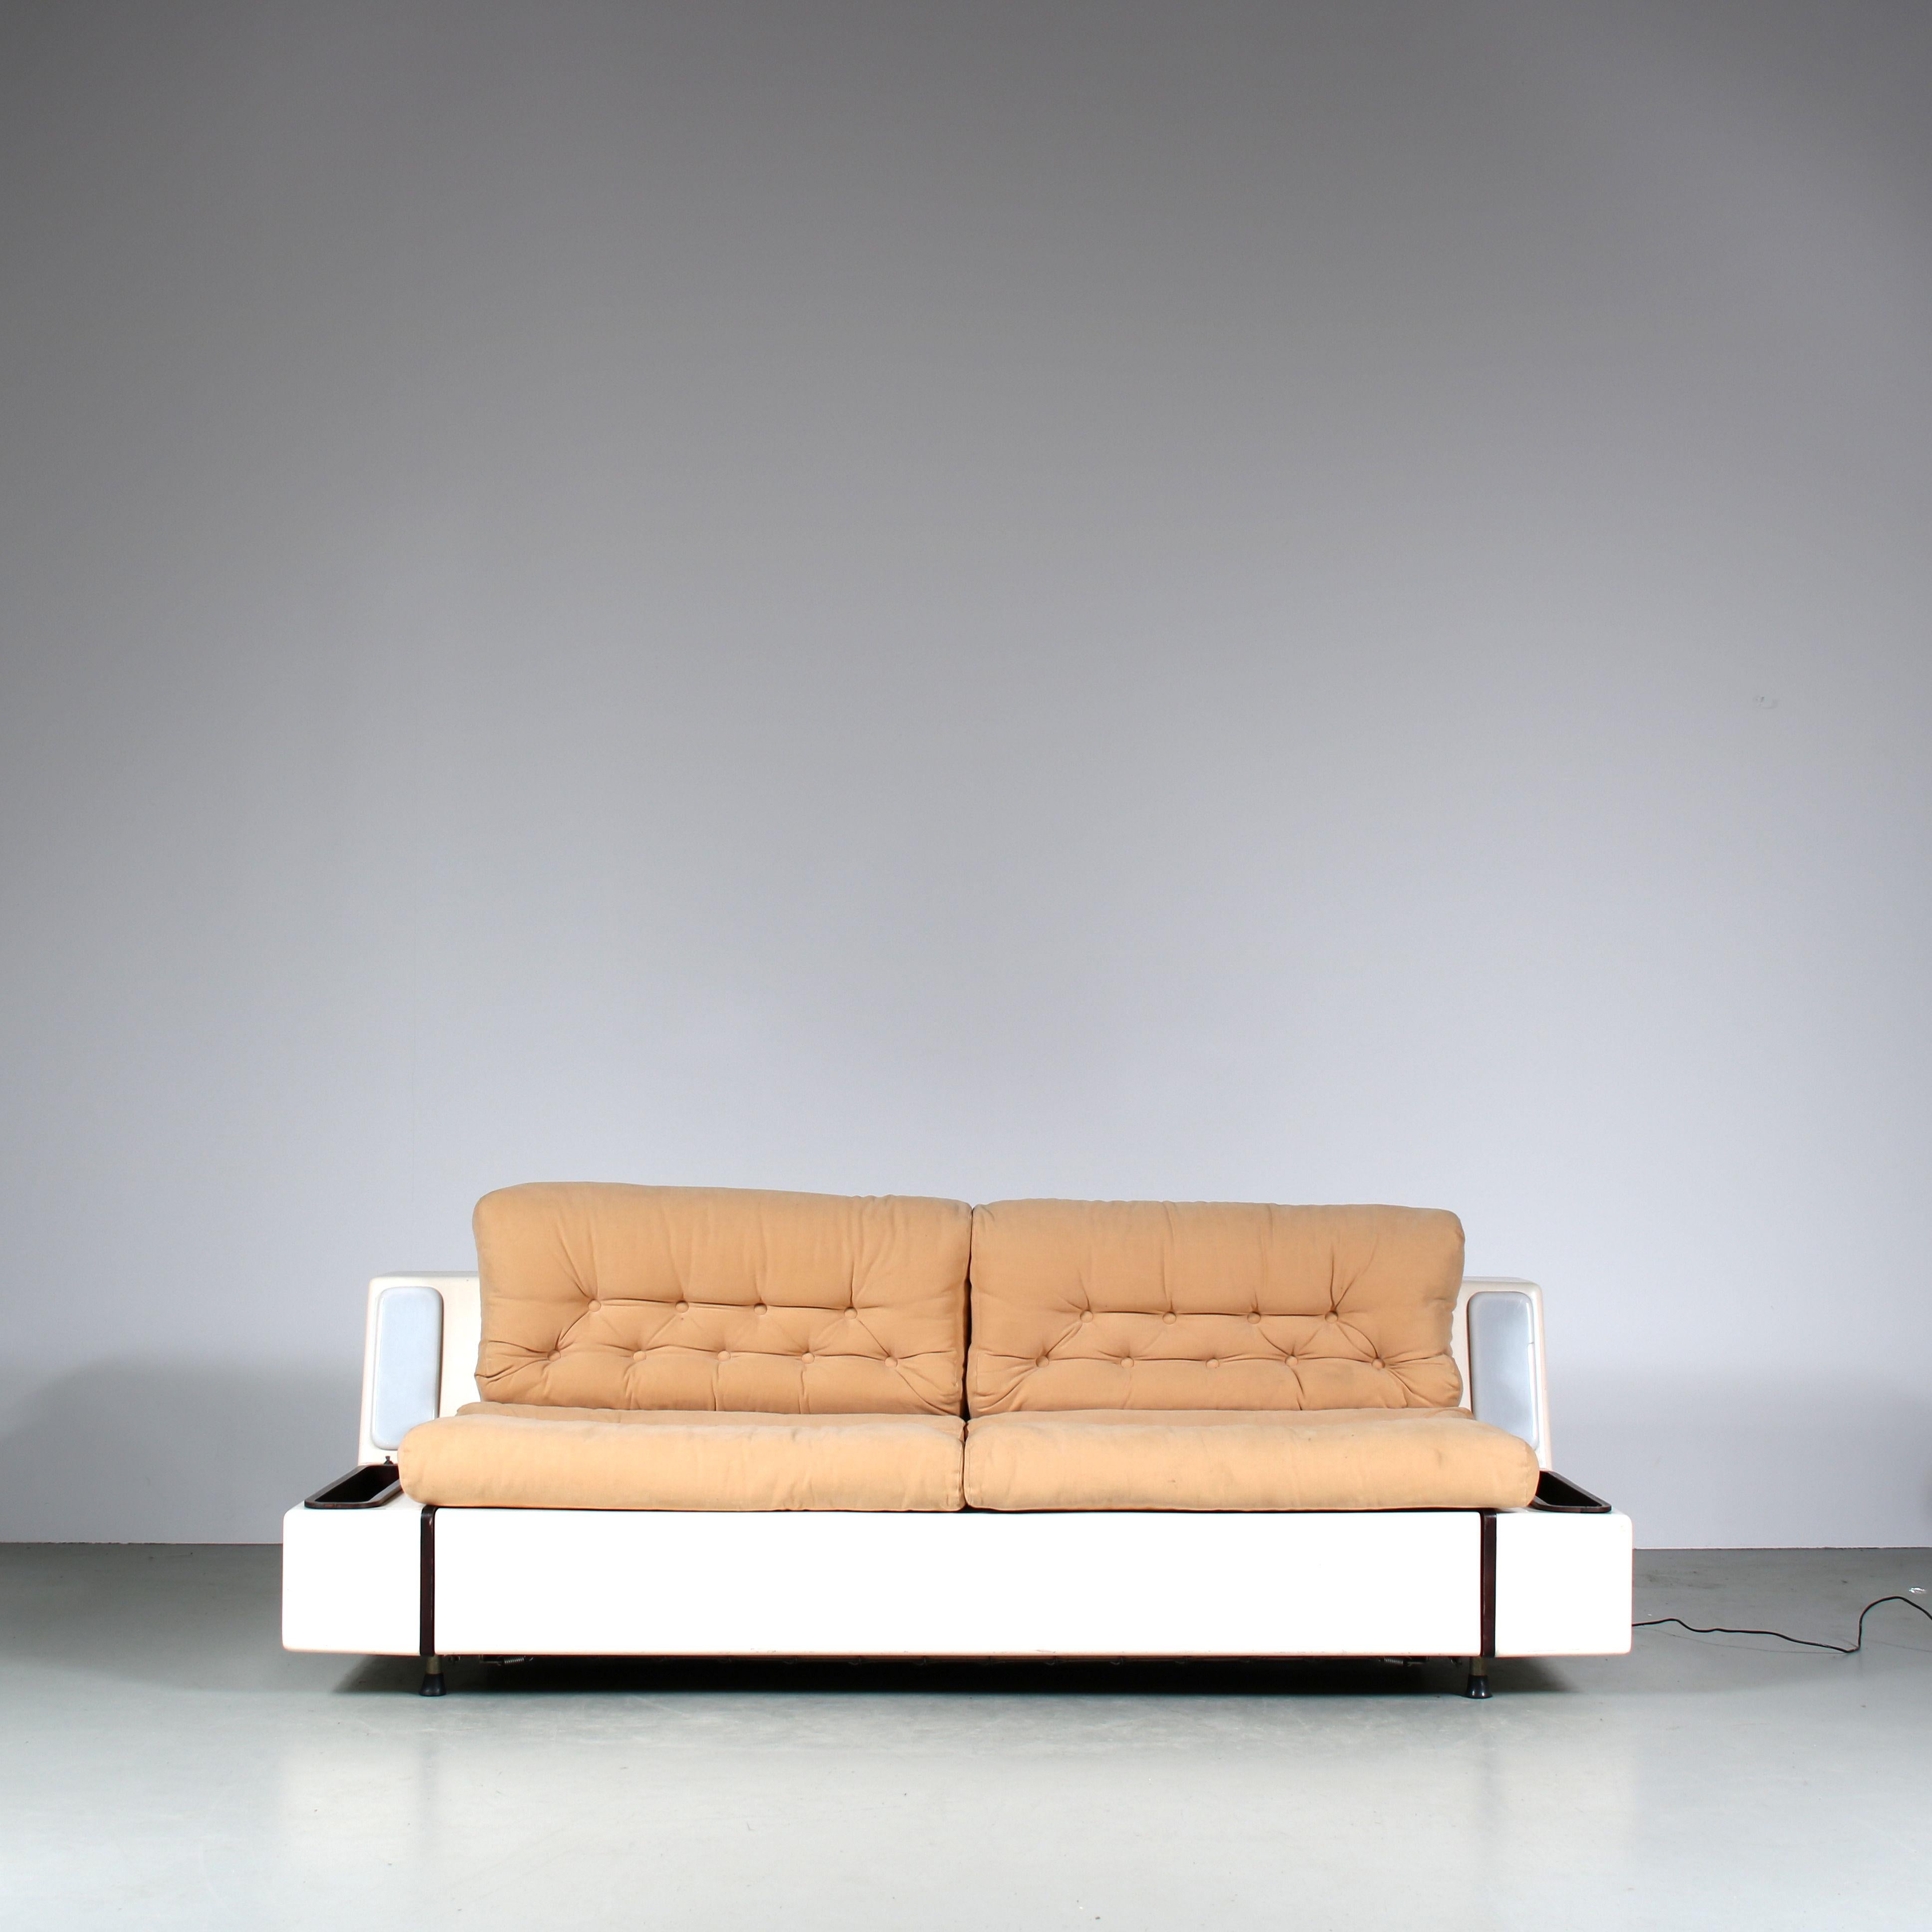 A striking piece of furniture from the Space Age era, the “Tortuga” sleeping sofa was manufactured by BEKA in Italy in the 1960s.

The sofa is a testament to the forward-thinking design of the era, with clean, modern lines and a distinctive white